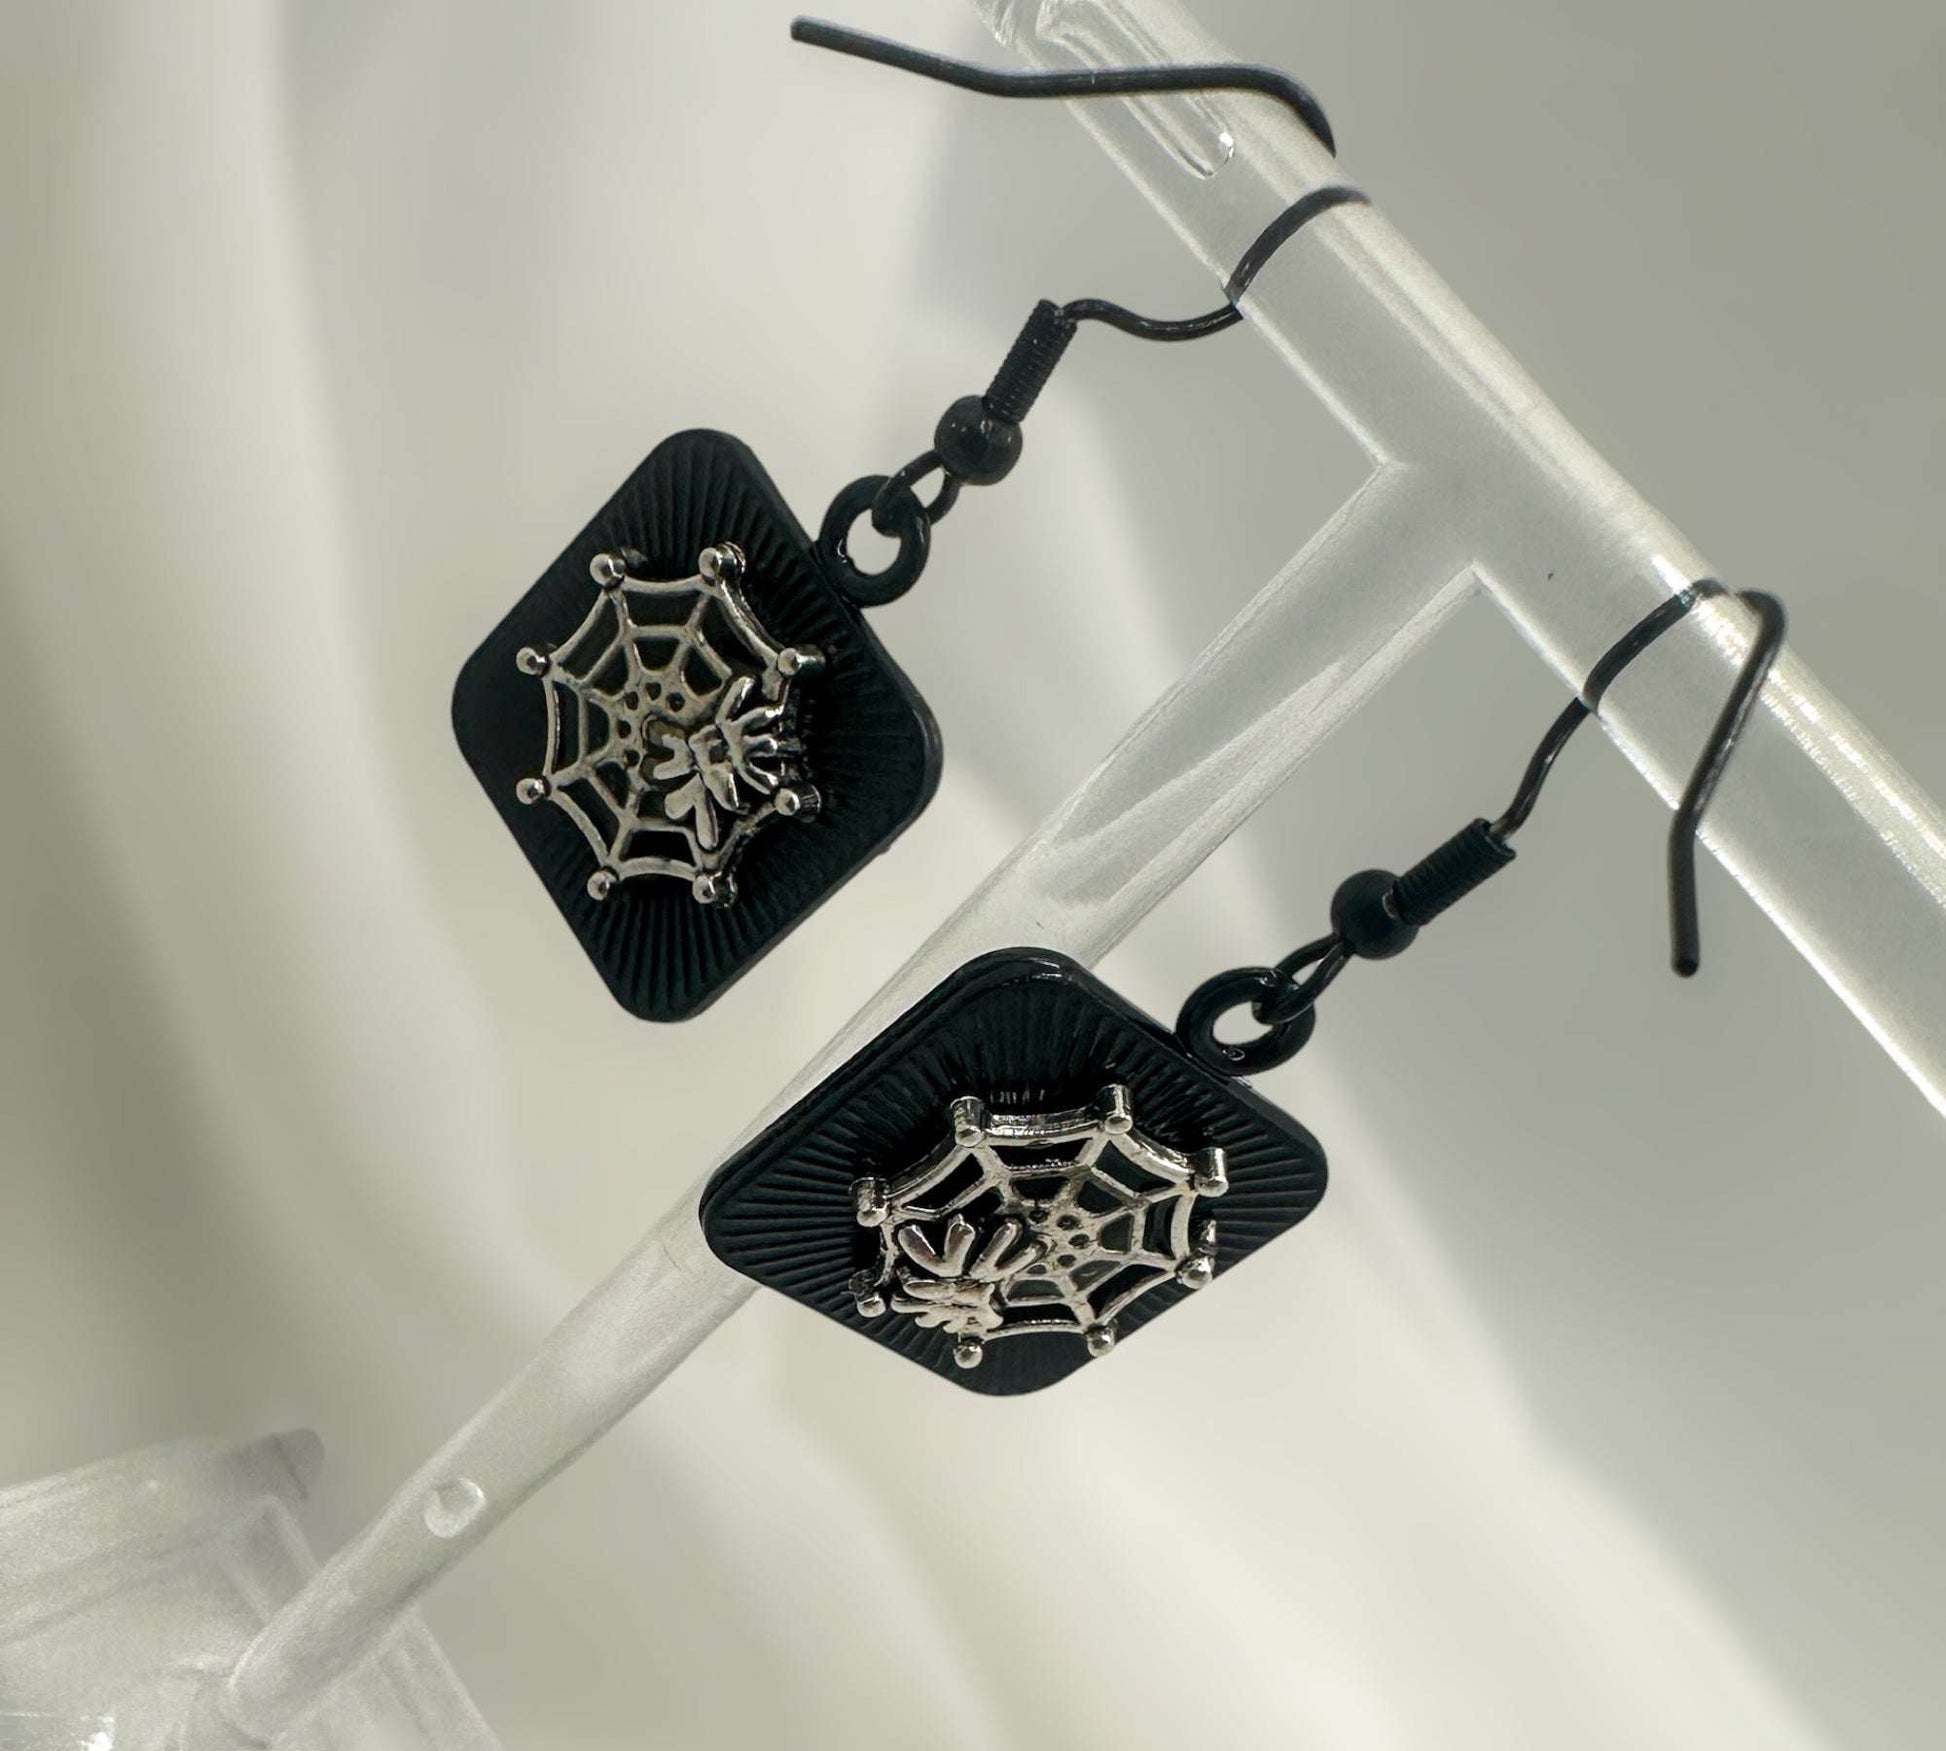 Spider Web Earrings: Gothic Elegance Meets Nature's Beauty